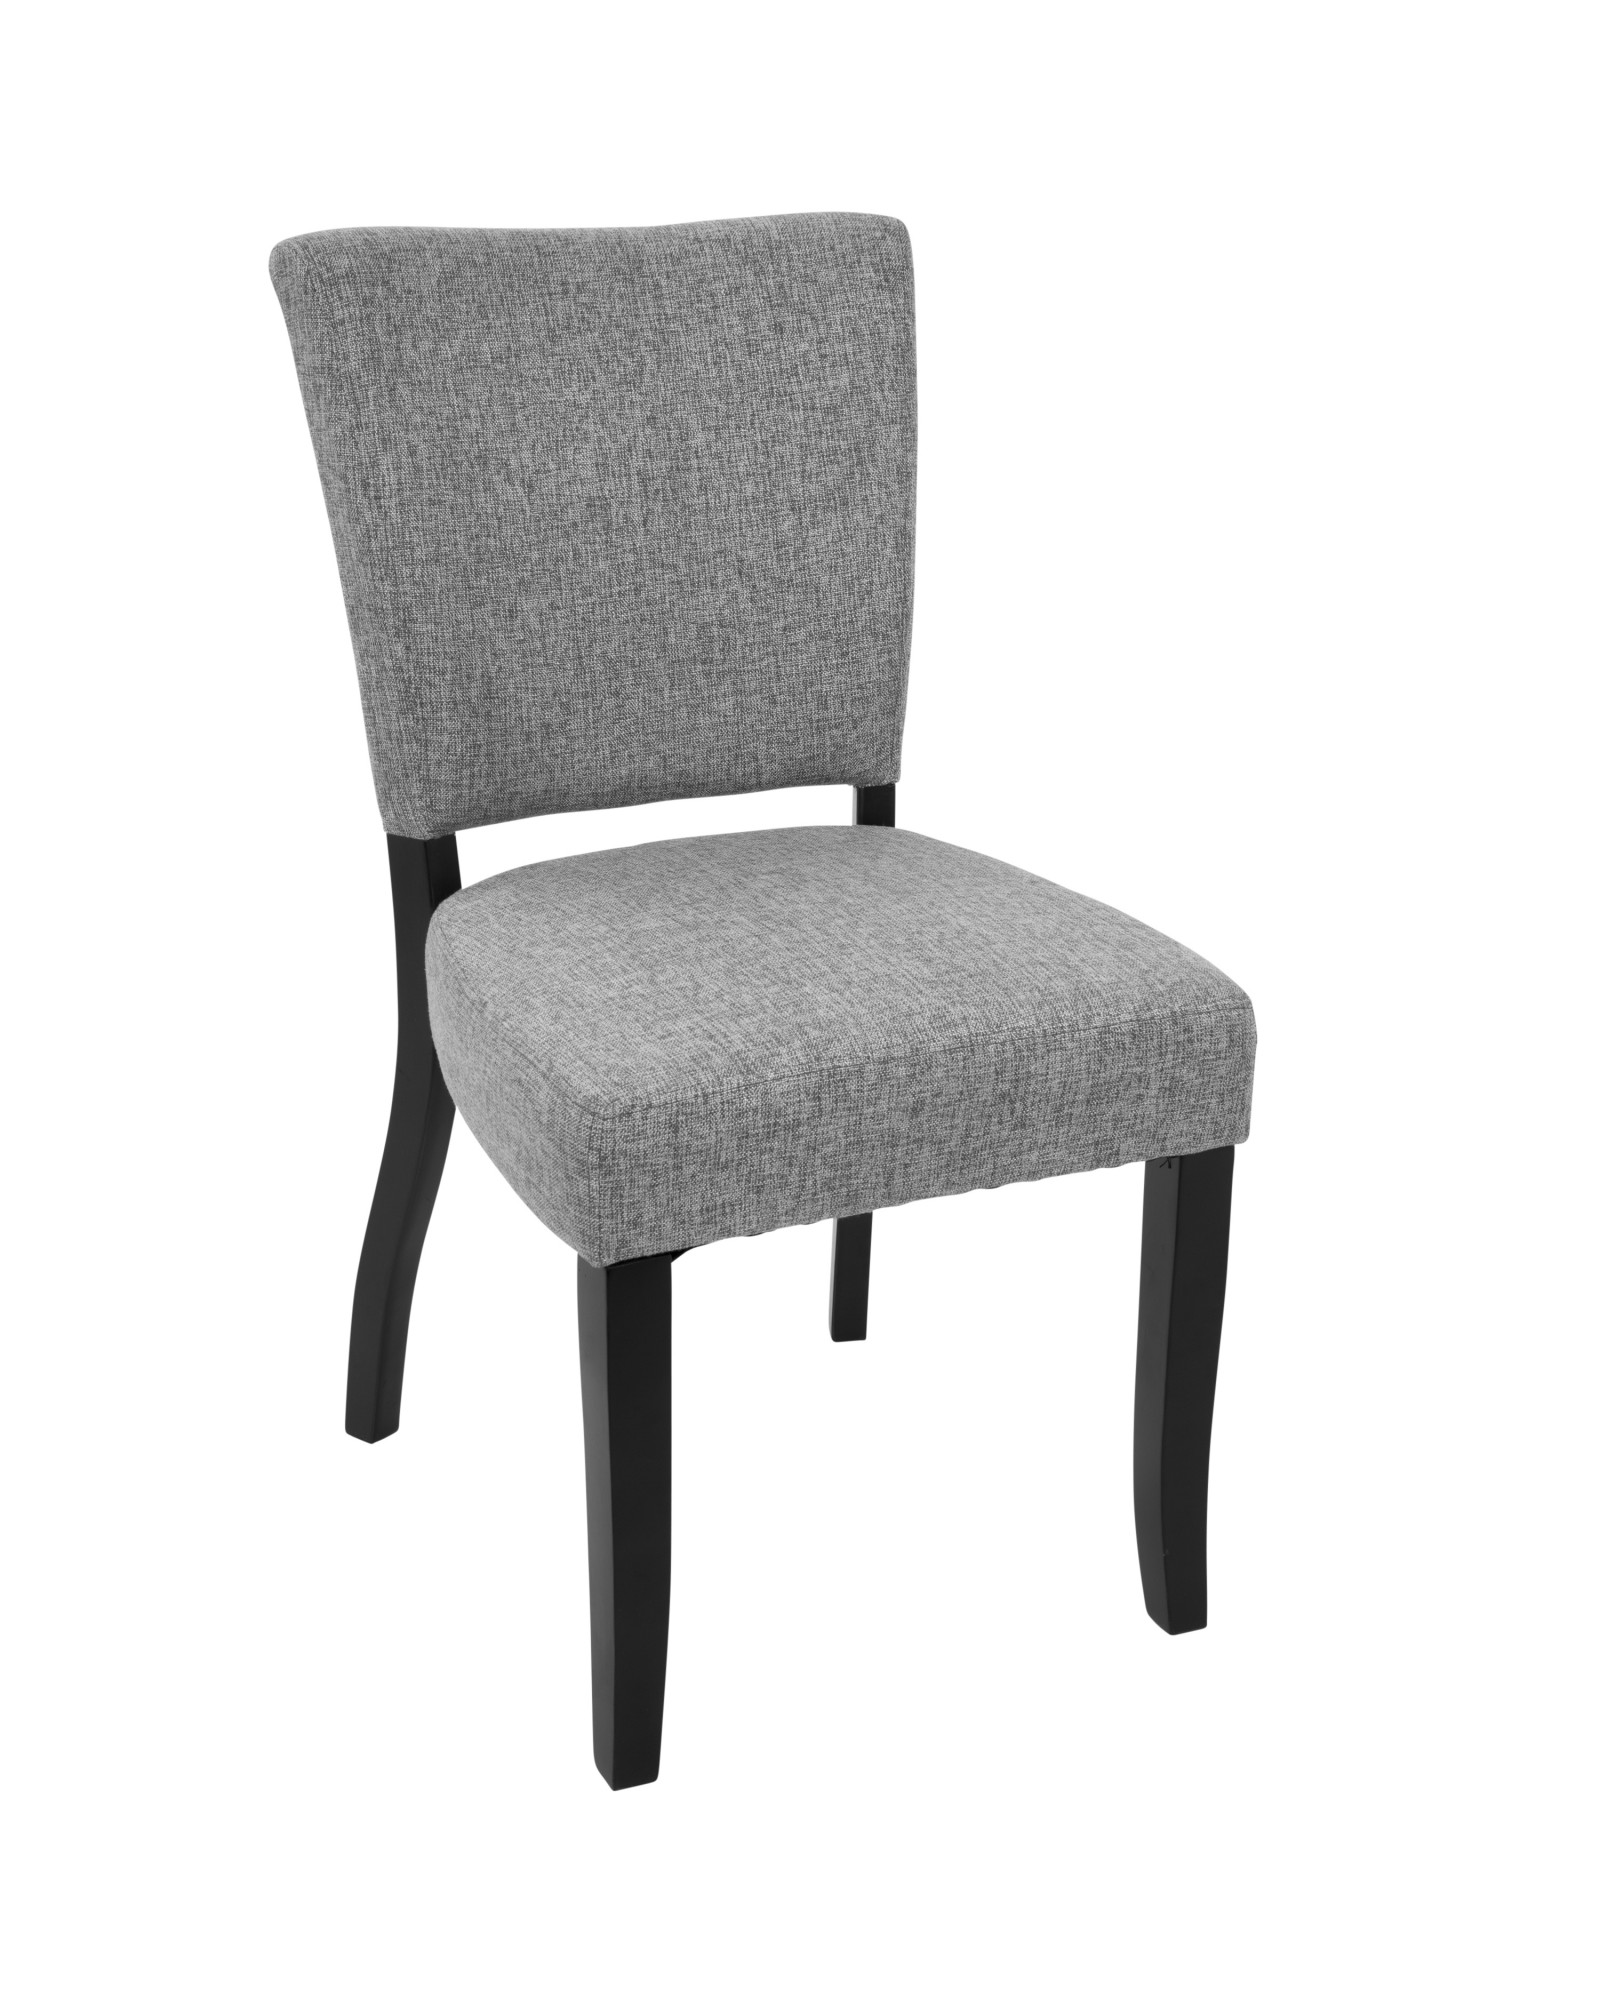 Vida Contemporary Dining Chair with Nailhead Trim in Espresso and Light Grey - Set of 2